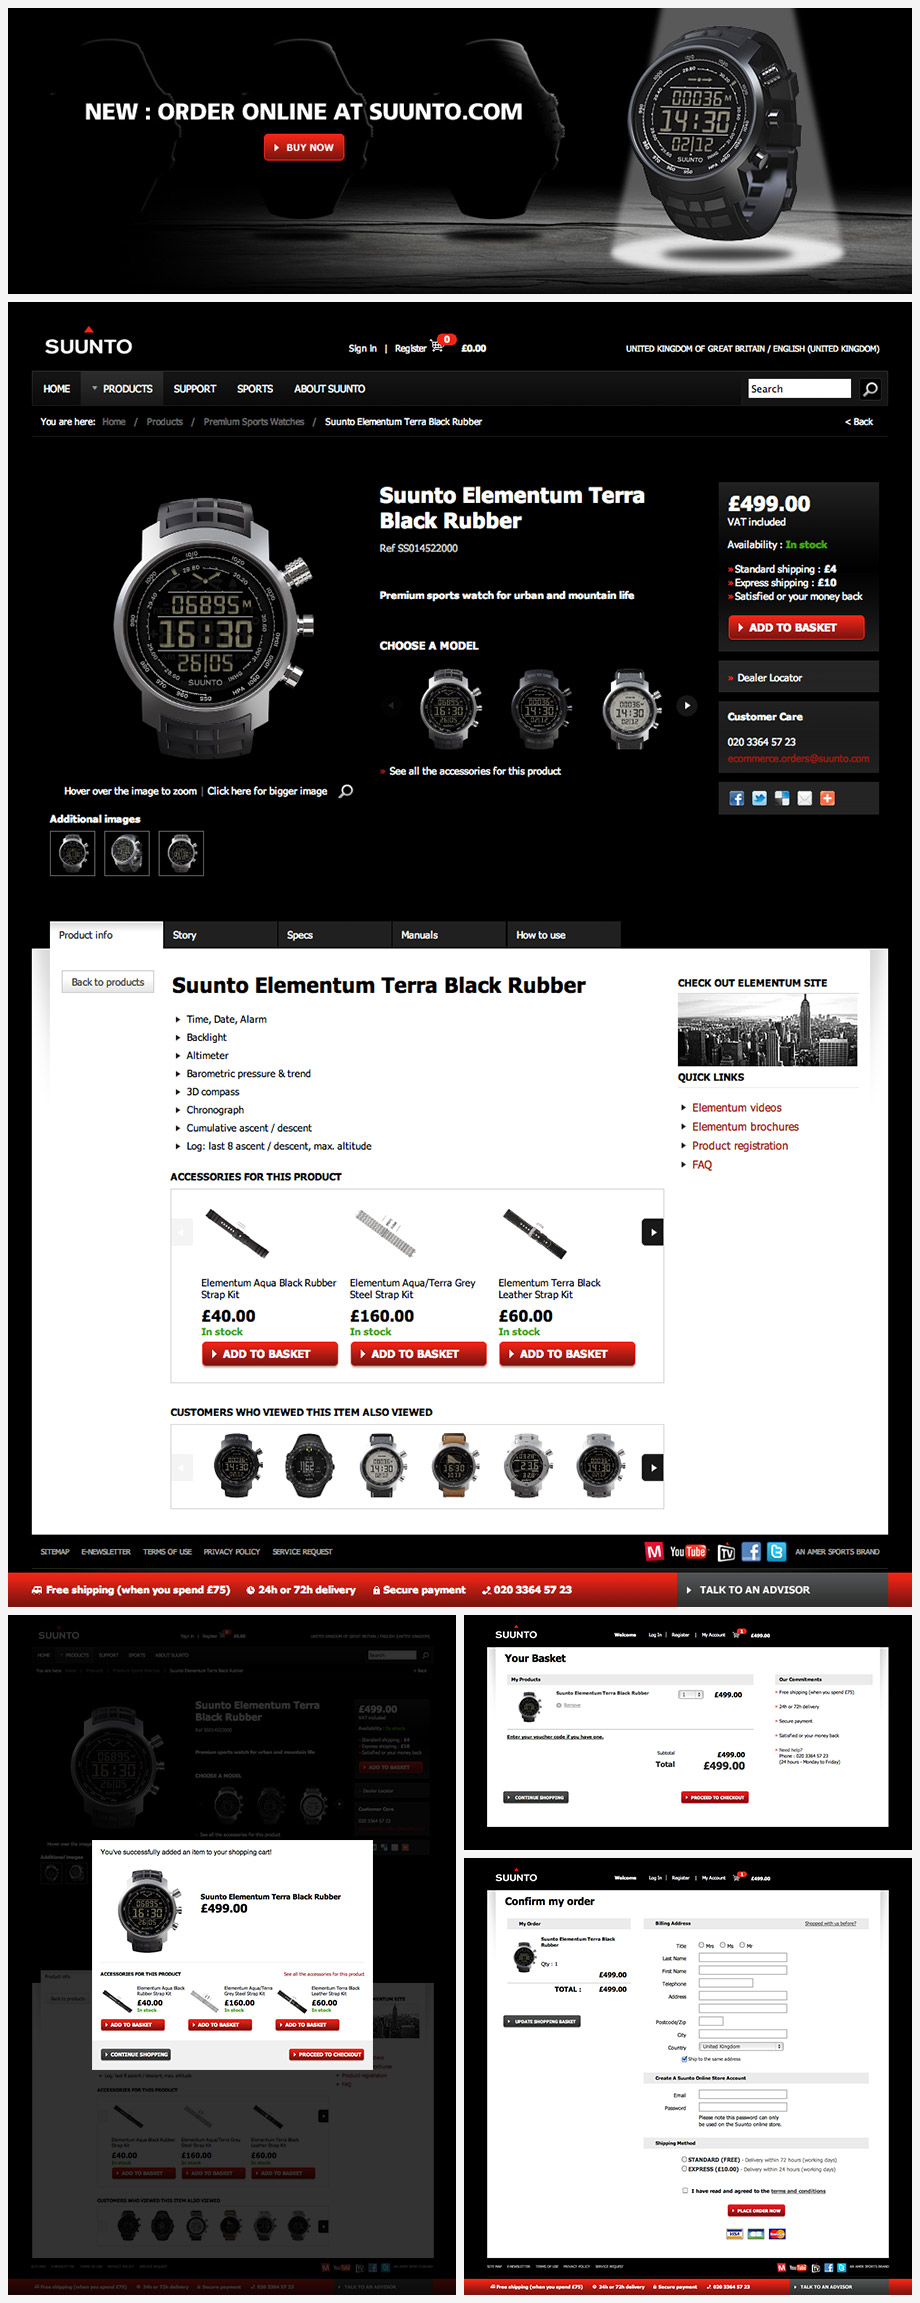 Examples of Suunto's e-commerce features